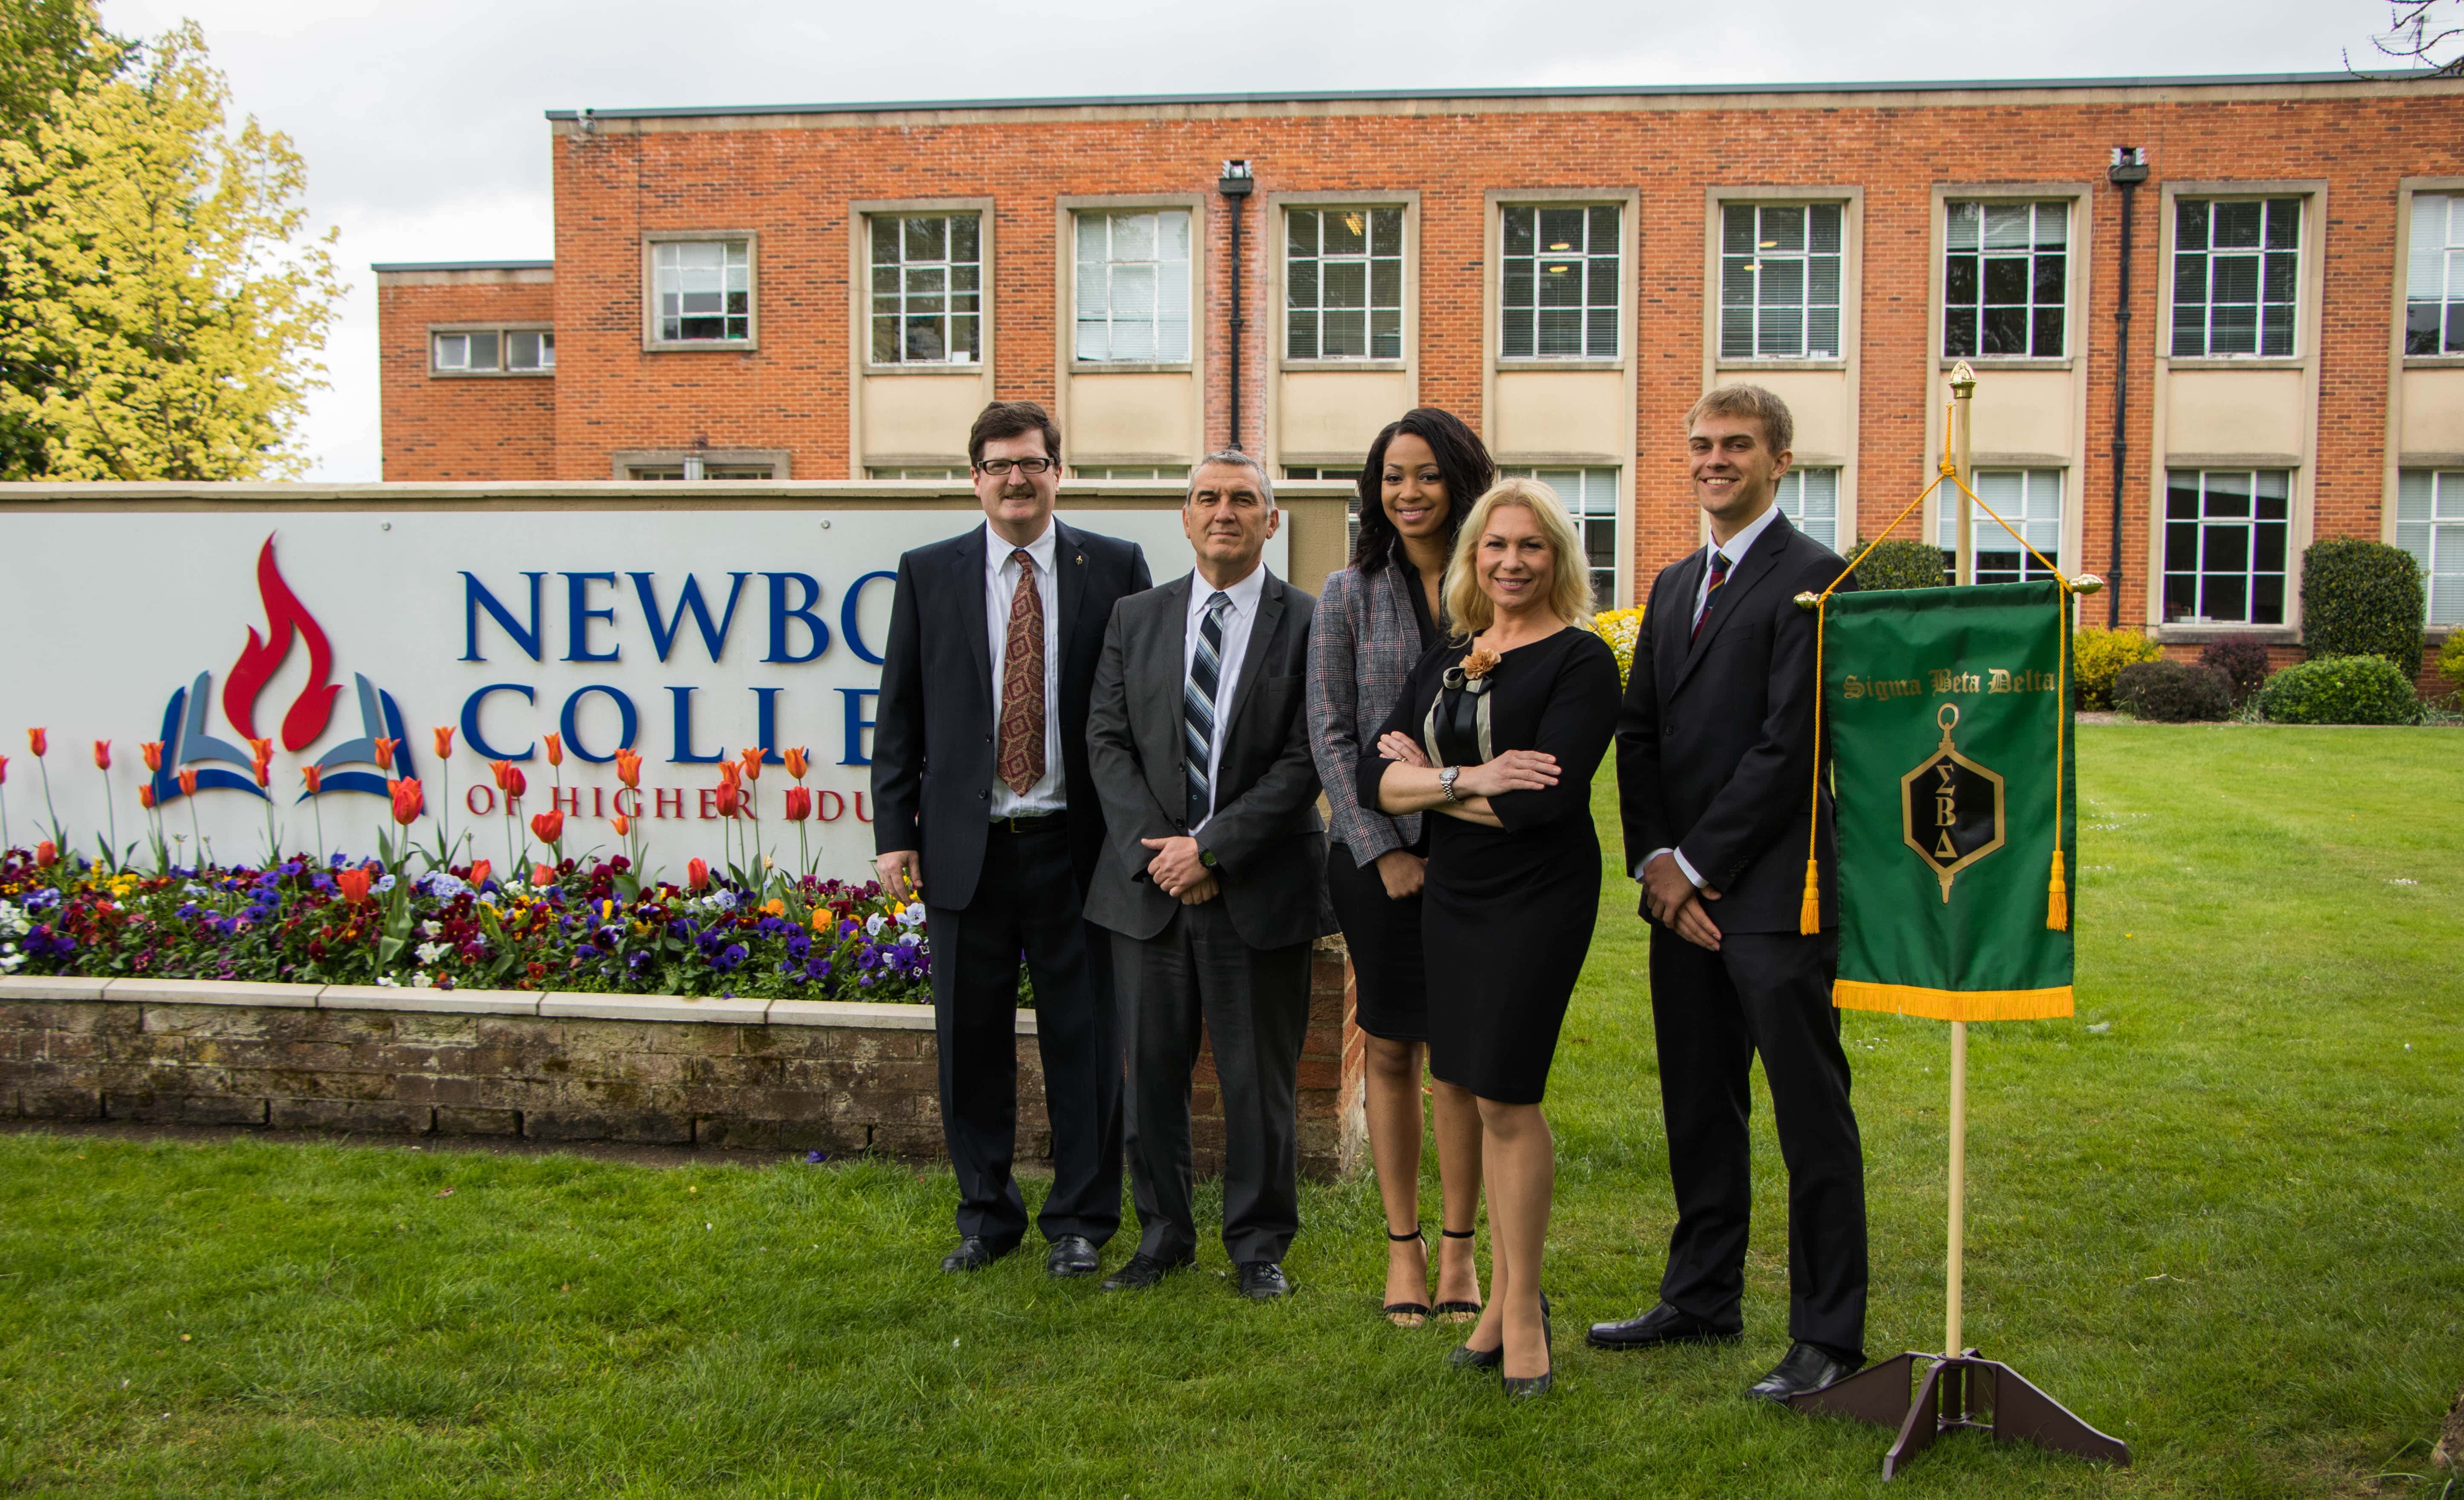 Two of the student inductees and their mentors, after the official induction ceremony on the campus of Newbold College, England, on April 28. [Photo: Newbold College]